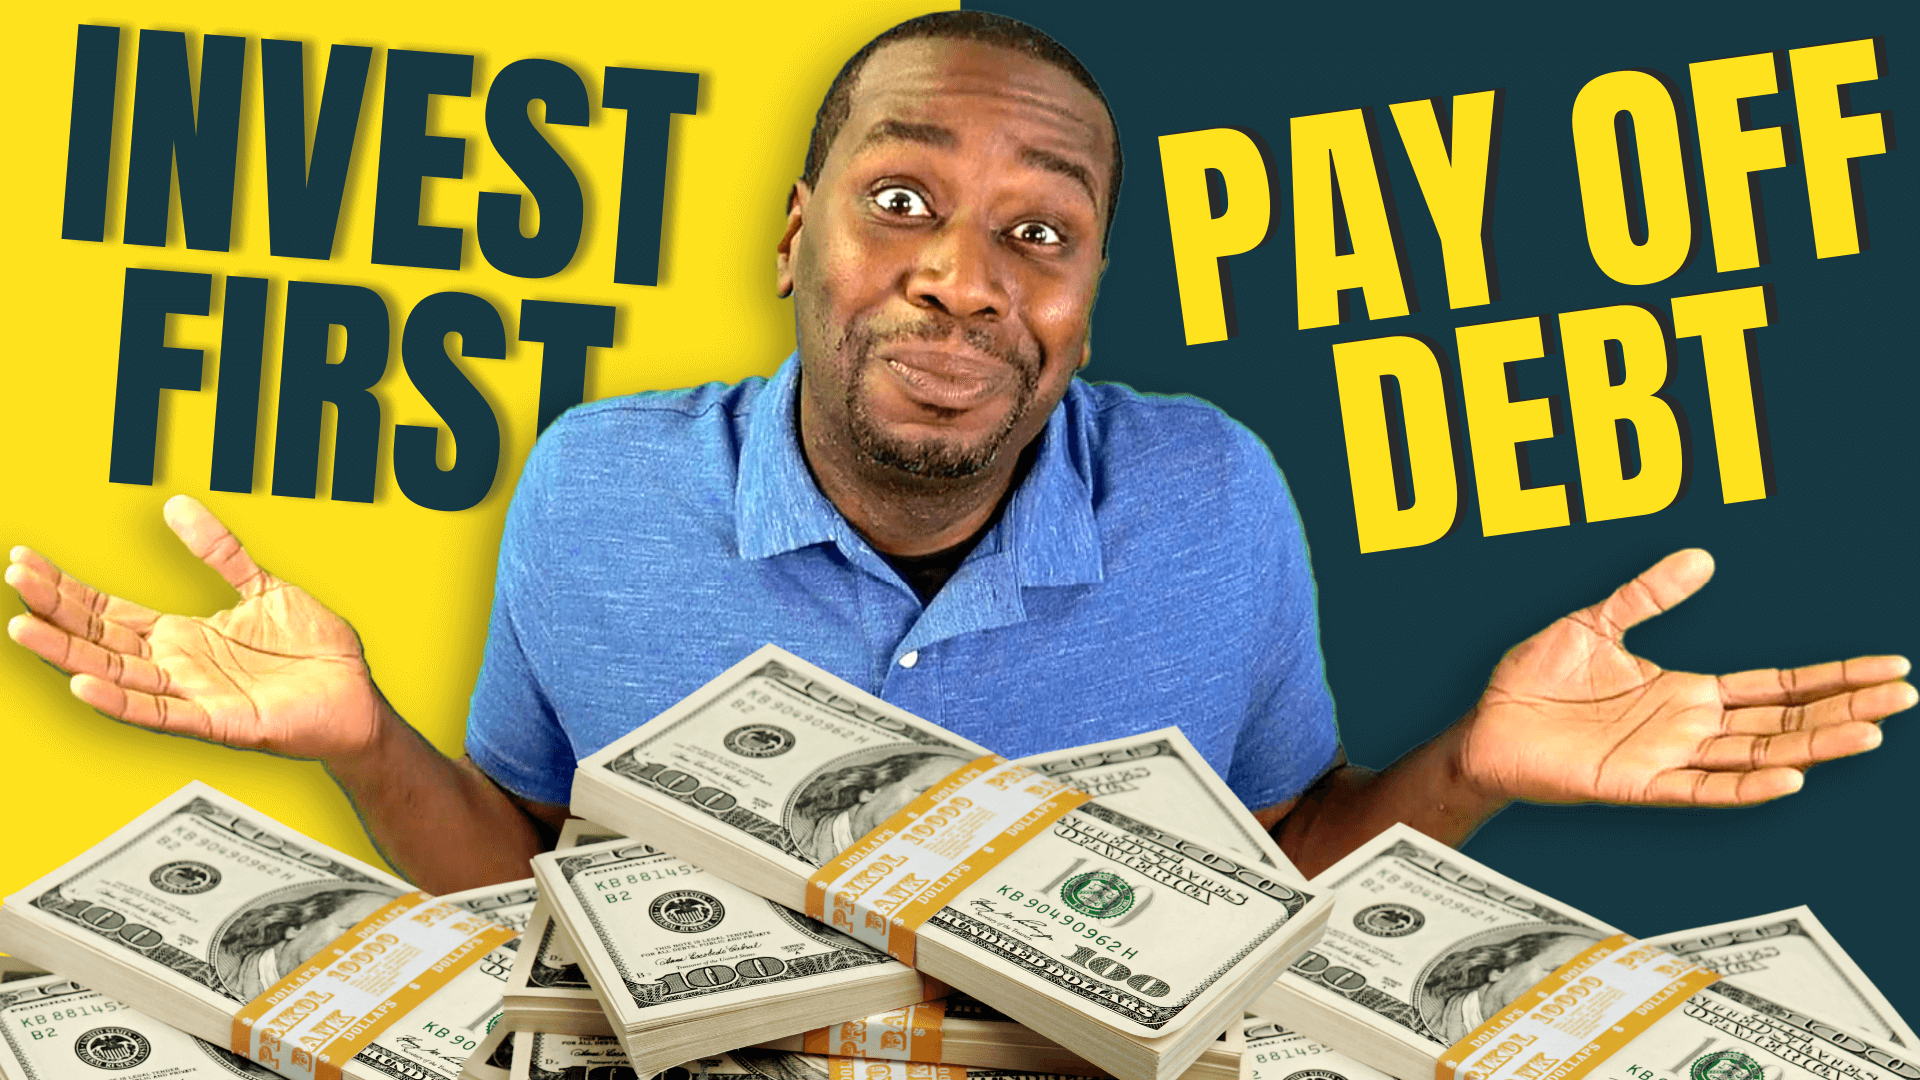 EP 094: Should I Invest or Pay Off Debt First?